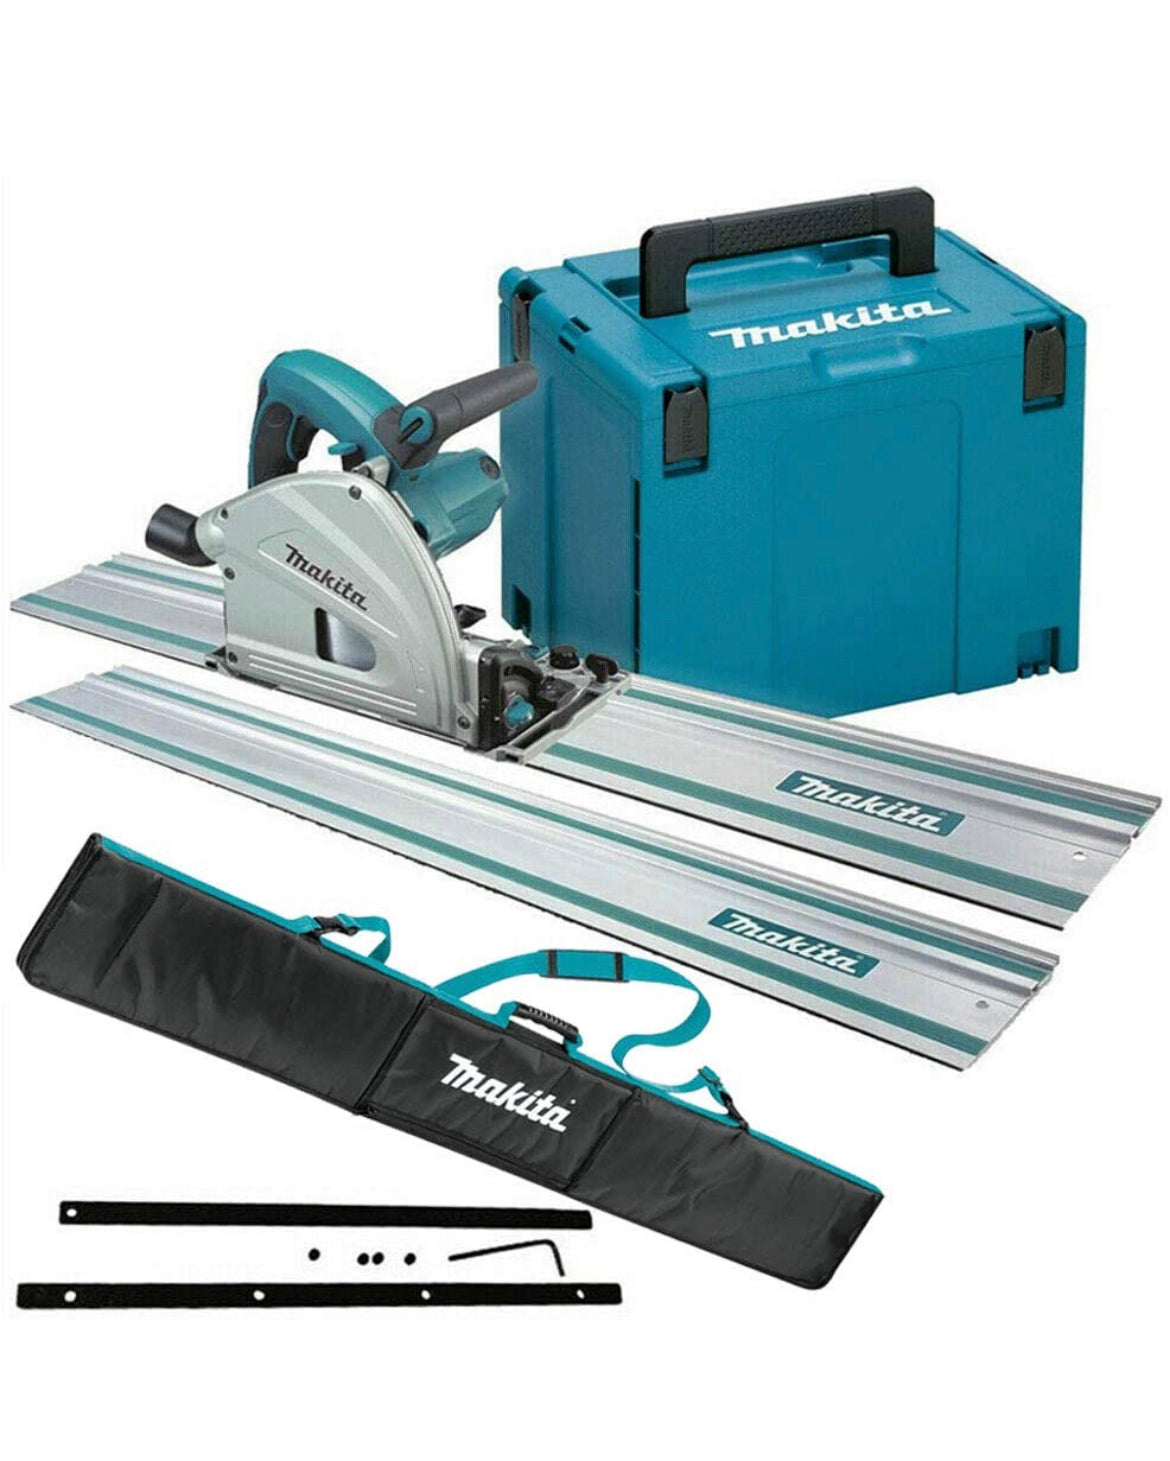 Makita DSP600ZJ Twin 18V/36V Brushless 165mm Plunge Saw with 2 x 1.5m Guide Rail & Case + Rail Bag